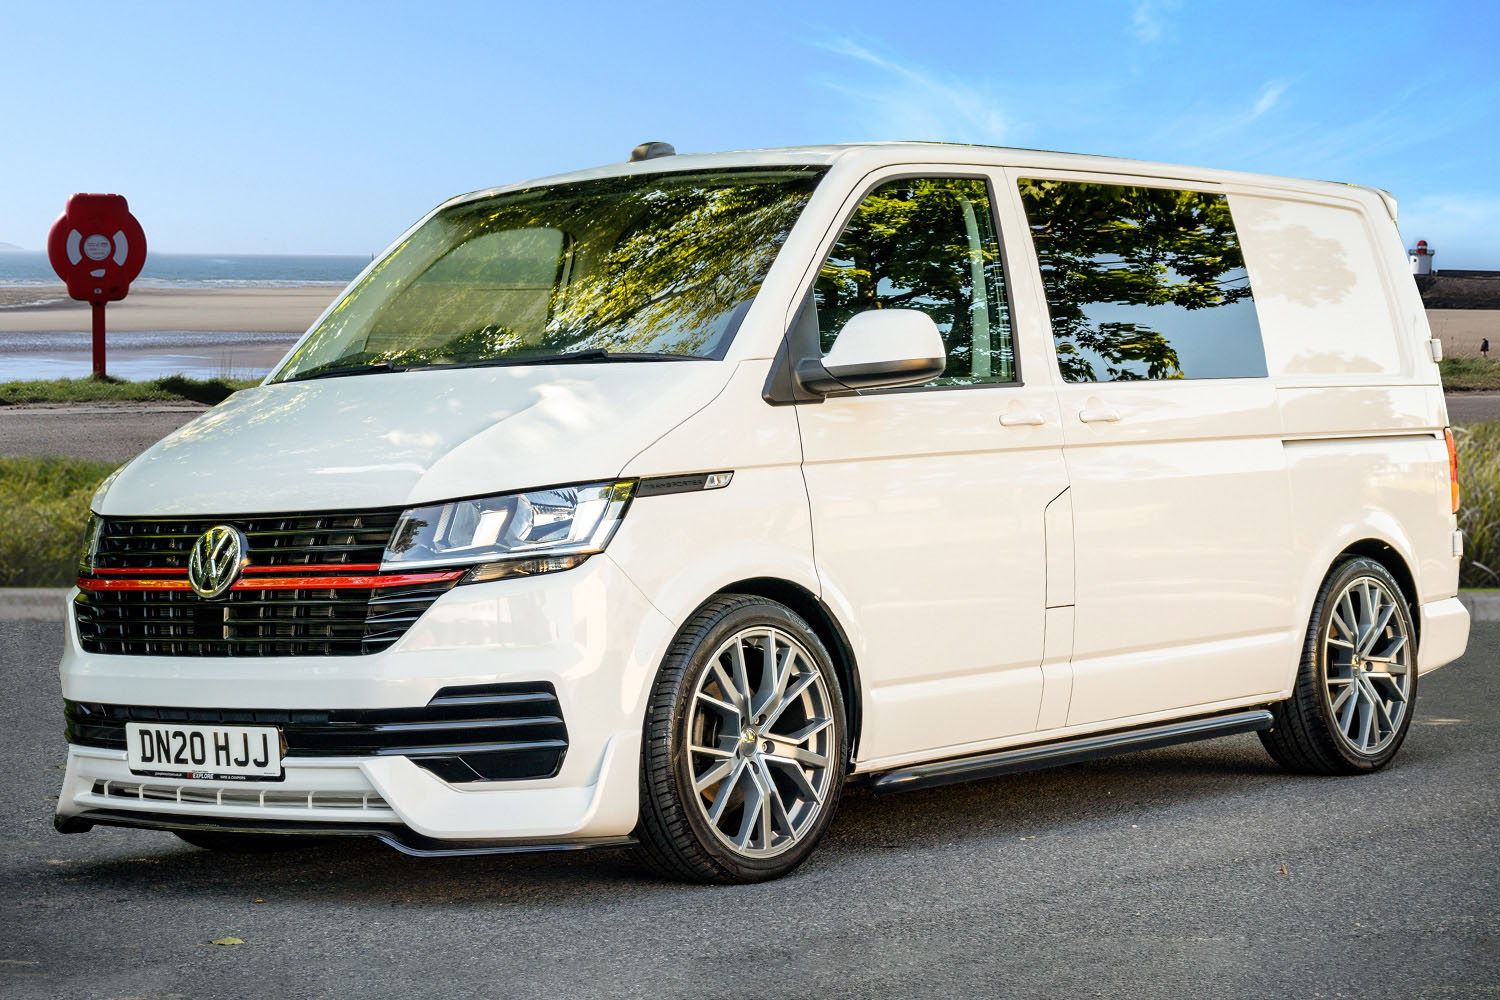 2020 Volkswagen Transporter T6.1 details, pictures and pricing